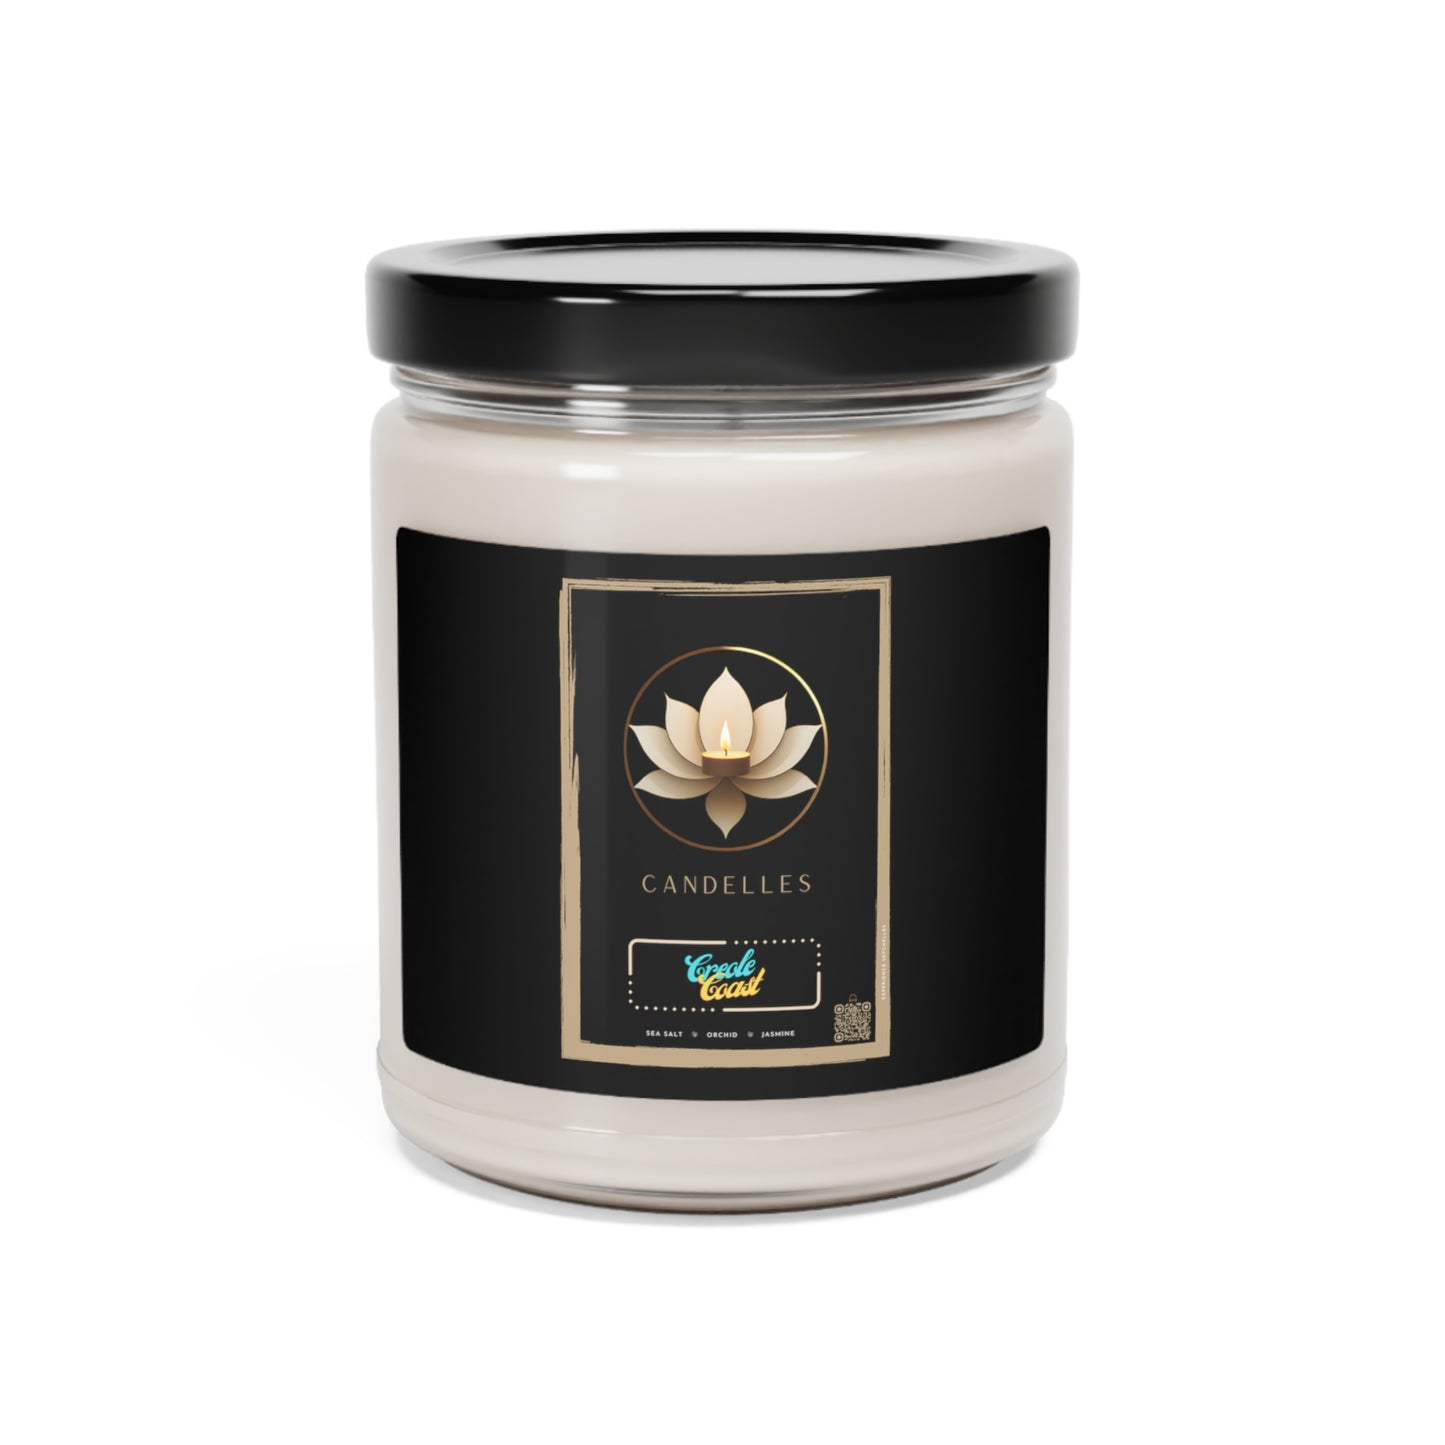 'Creole Coast' by Candelles, Scented Soy Candle, 9oz